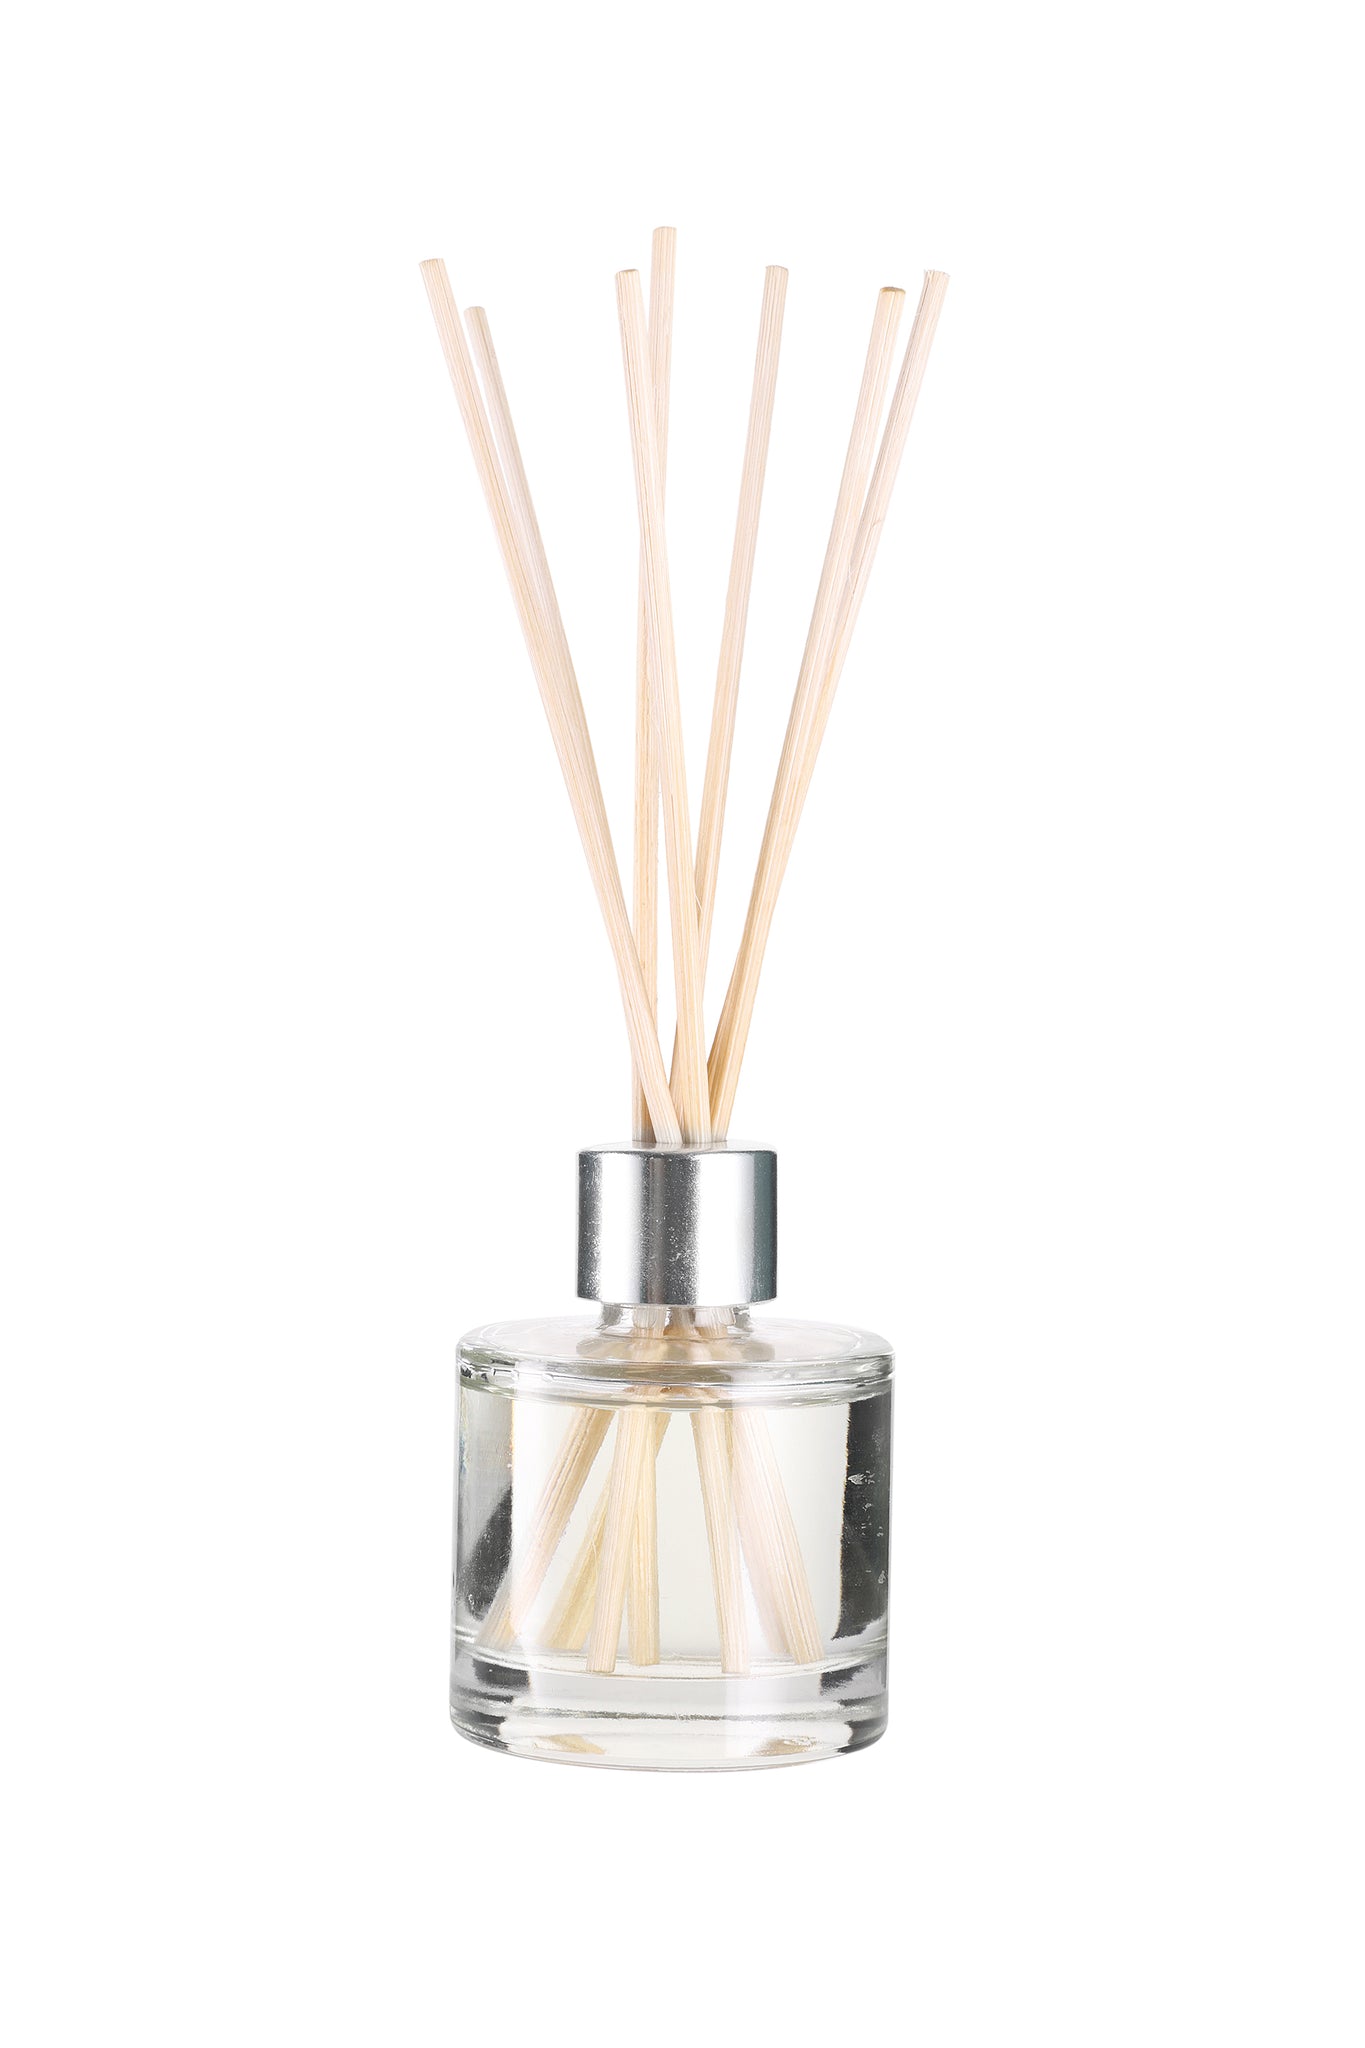 Arofume Reed Diffuser Gift set with Glass Pot,Reed Sticks & Oil Long Lasting Scent for for Home Office (Lavender Vanilla  Fragrance)